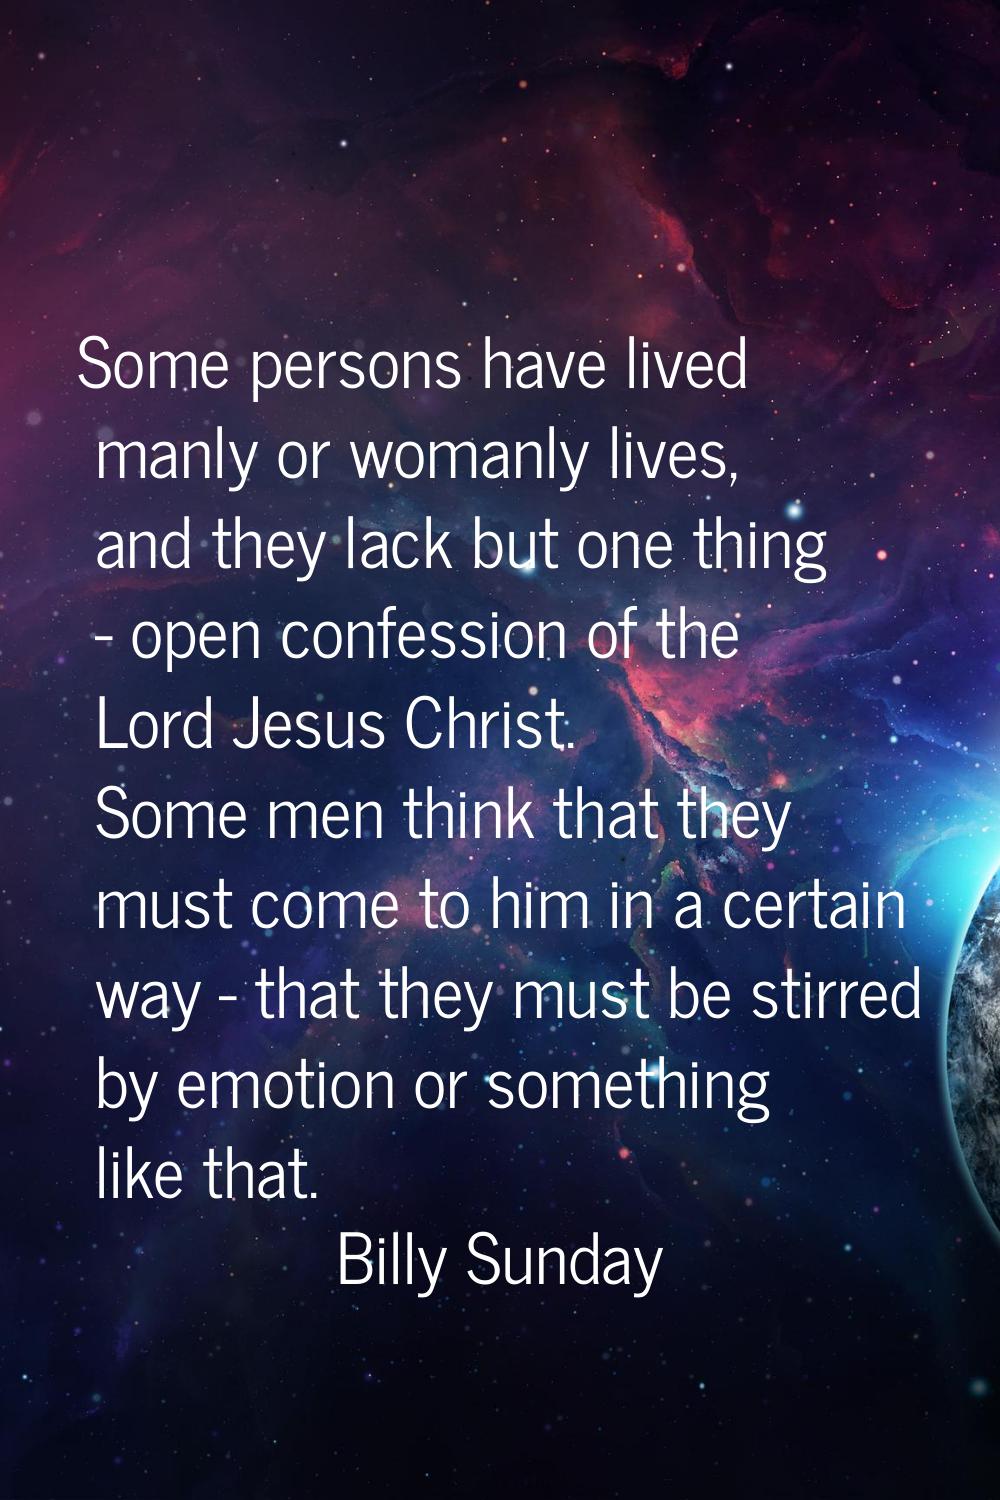 Some persons have lived manly or womanly lives, and they lack but one thing - open confession of th